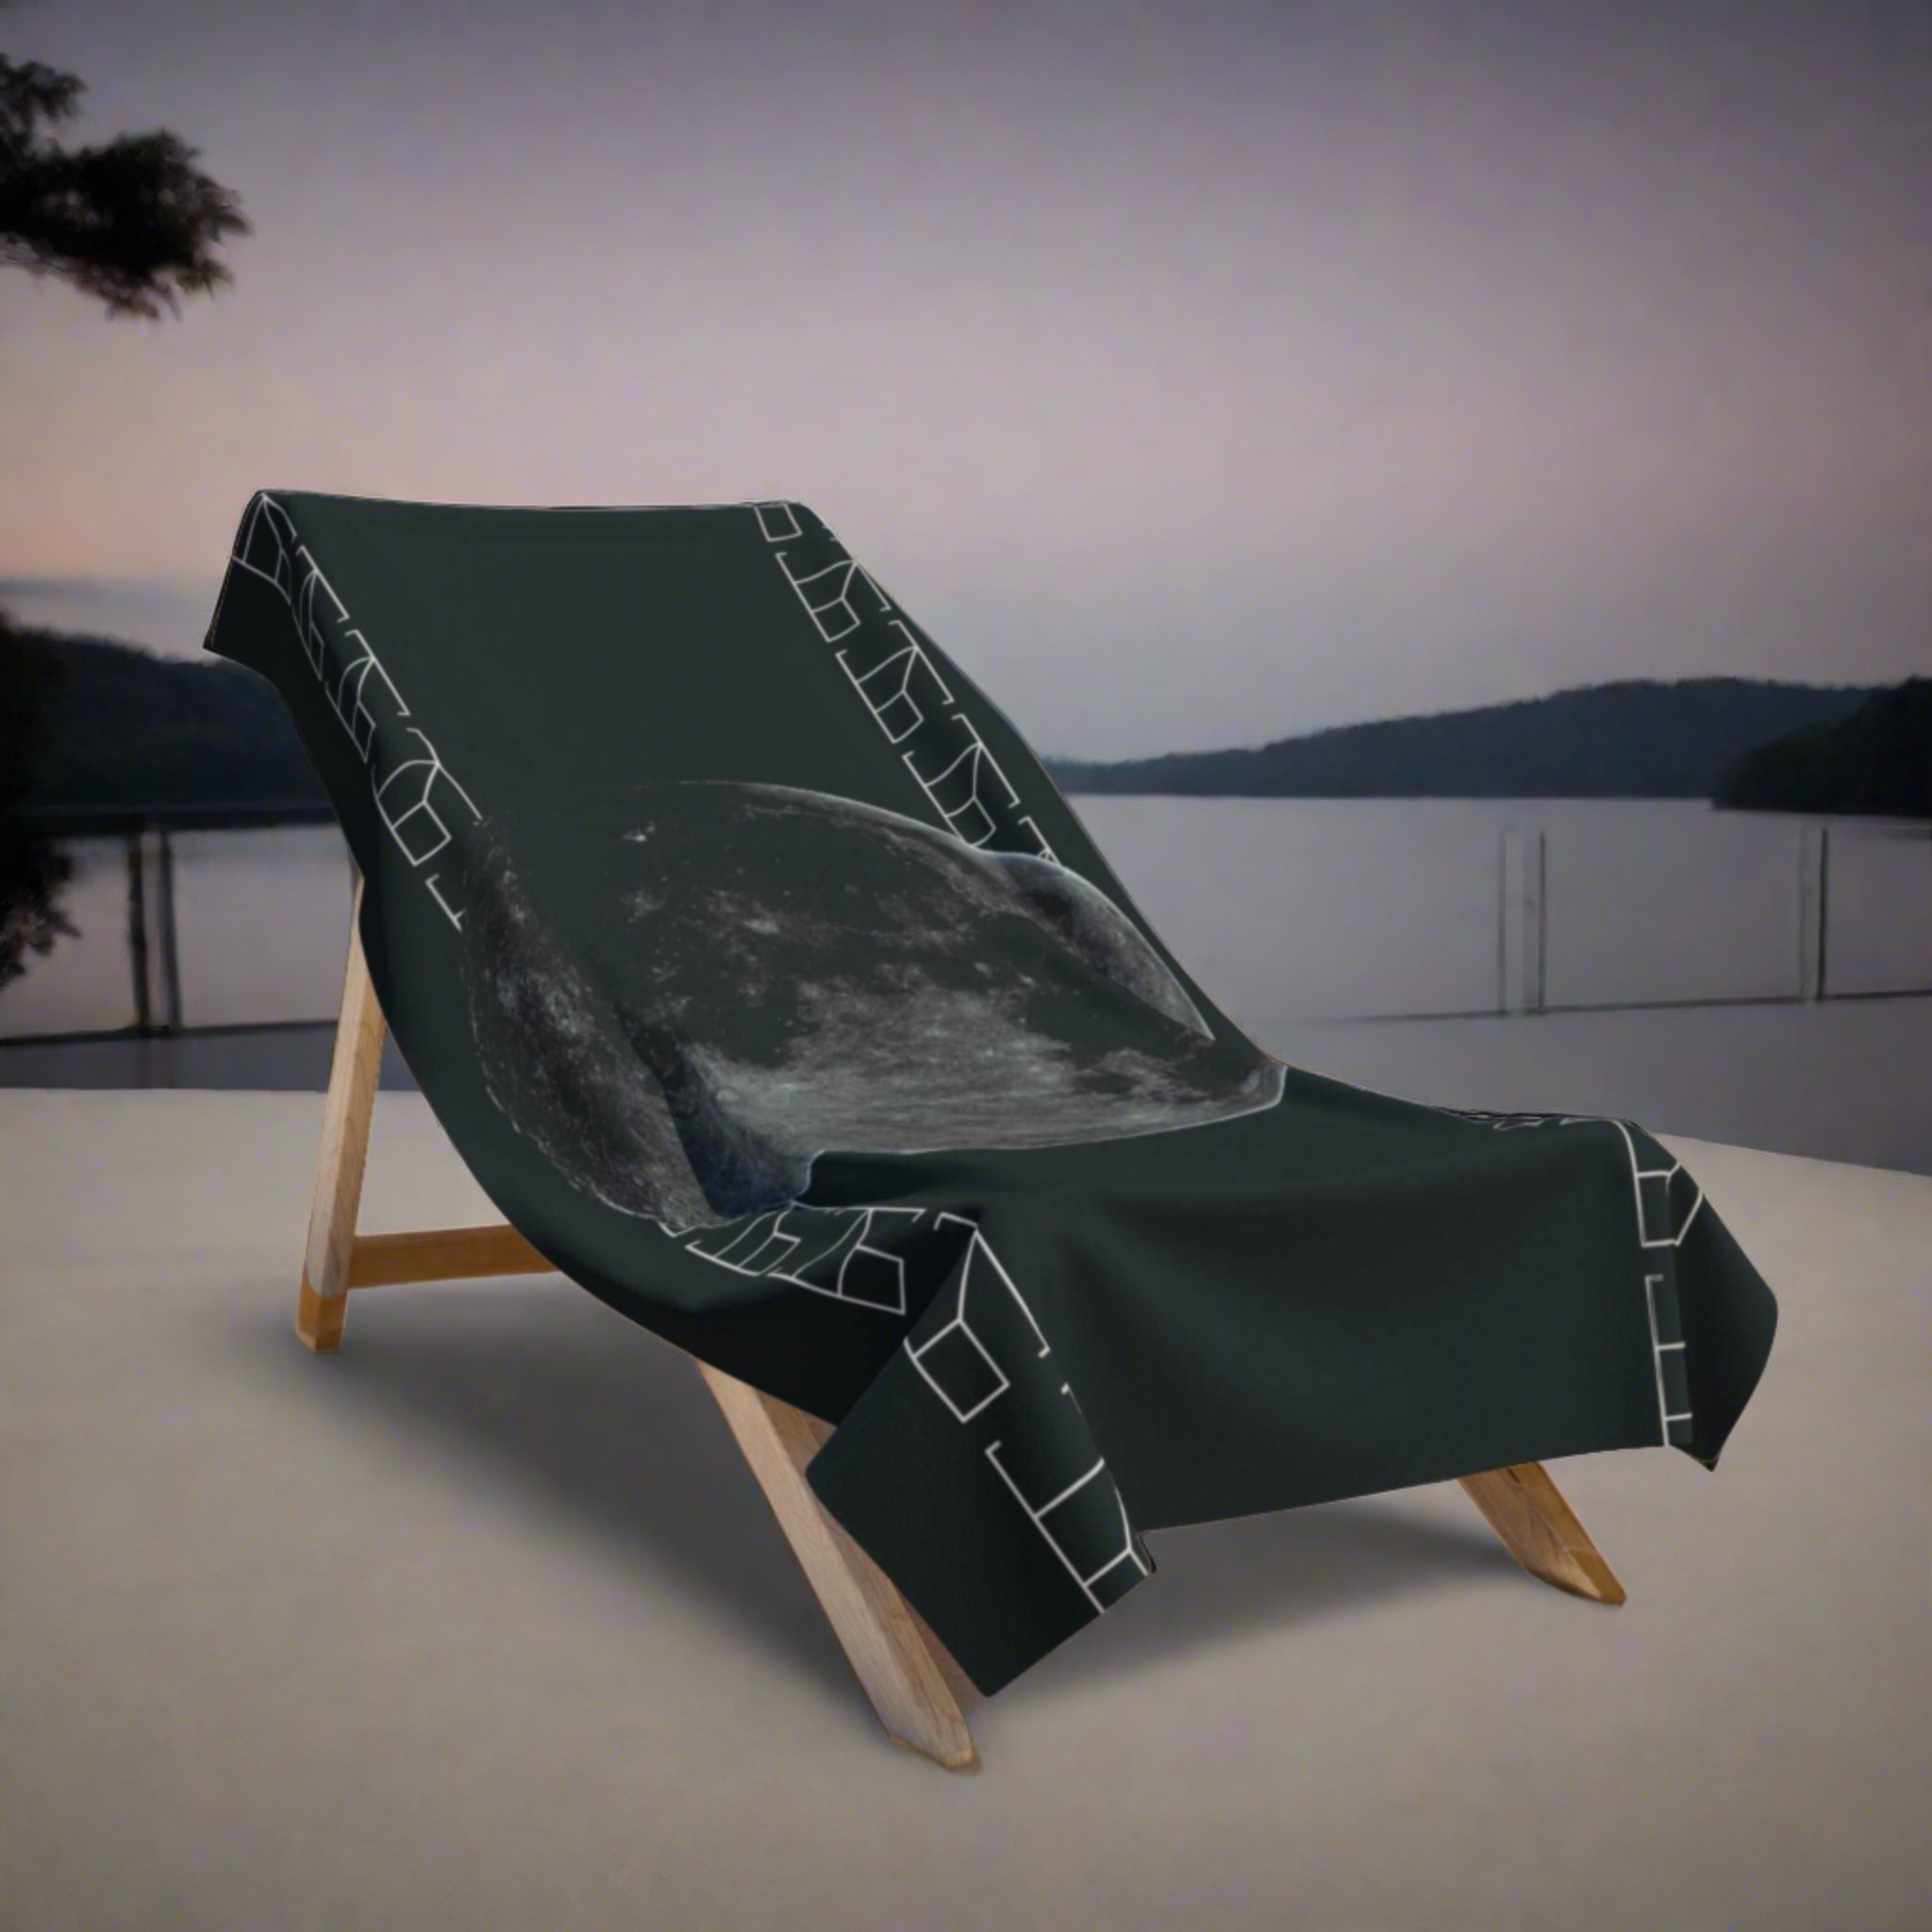 A secluded observation deck under the open night sky creates the perfect backdrop for the Nocturnal Silence Collection bath towel, which lies on a wooden deckchair. The dark silhouette of the surrounding forest contrasts with the starlit heavens, reflecting the towel's astral elegance and offering a sense of tranquil solitude